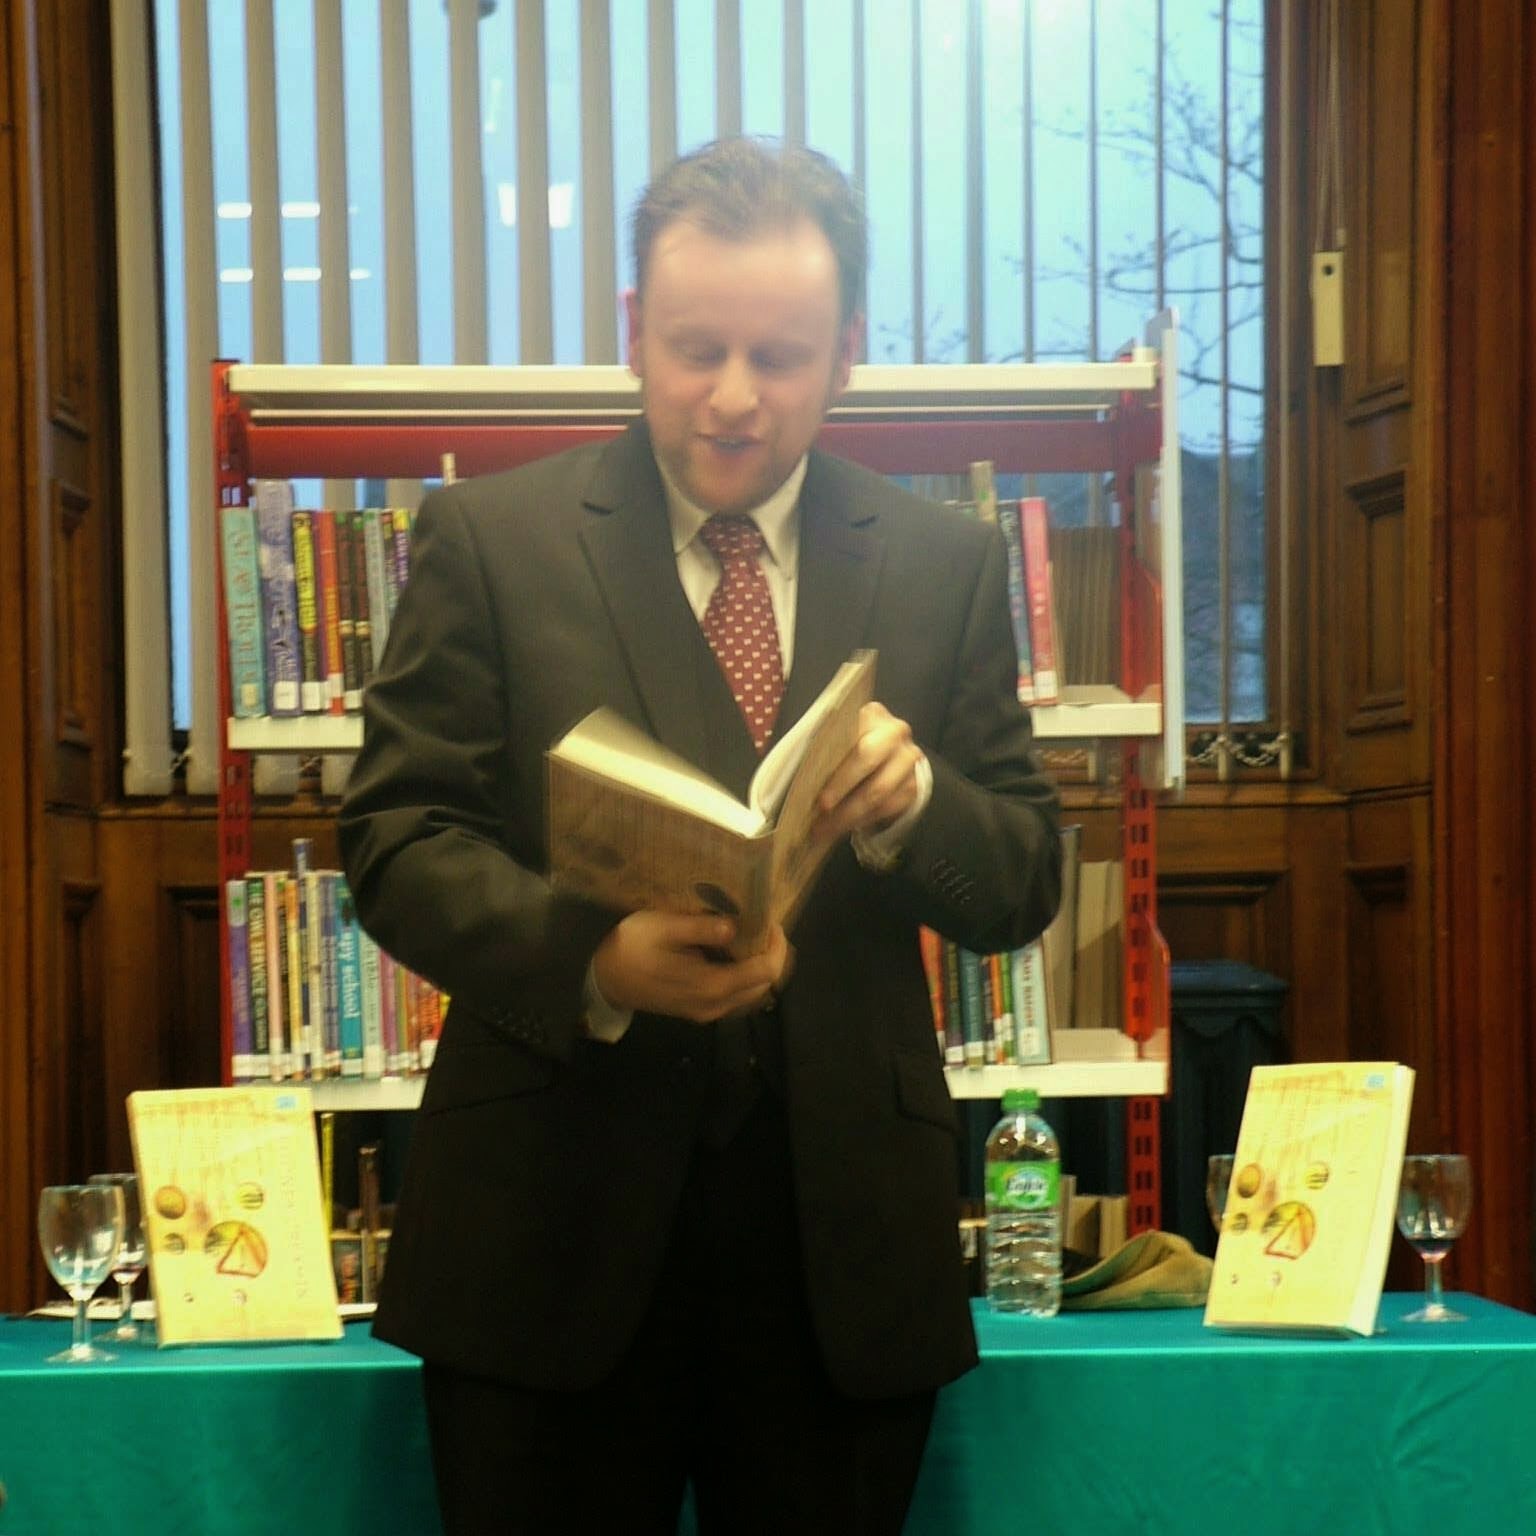 Me in a suit and tie reading from a book while in front of a table displaying said book